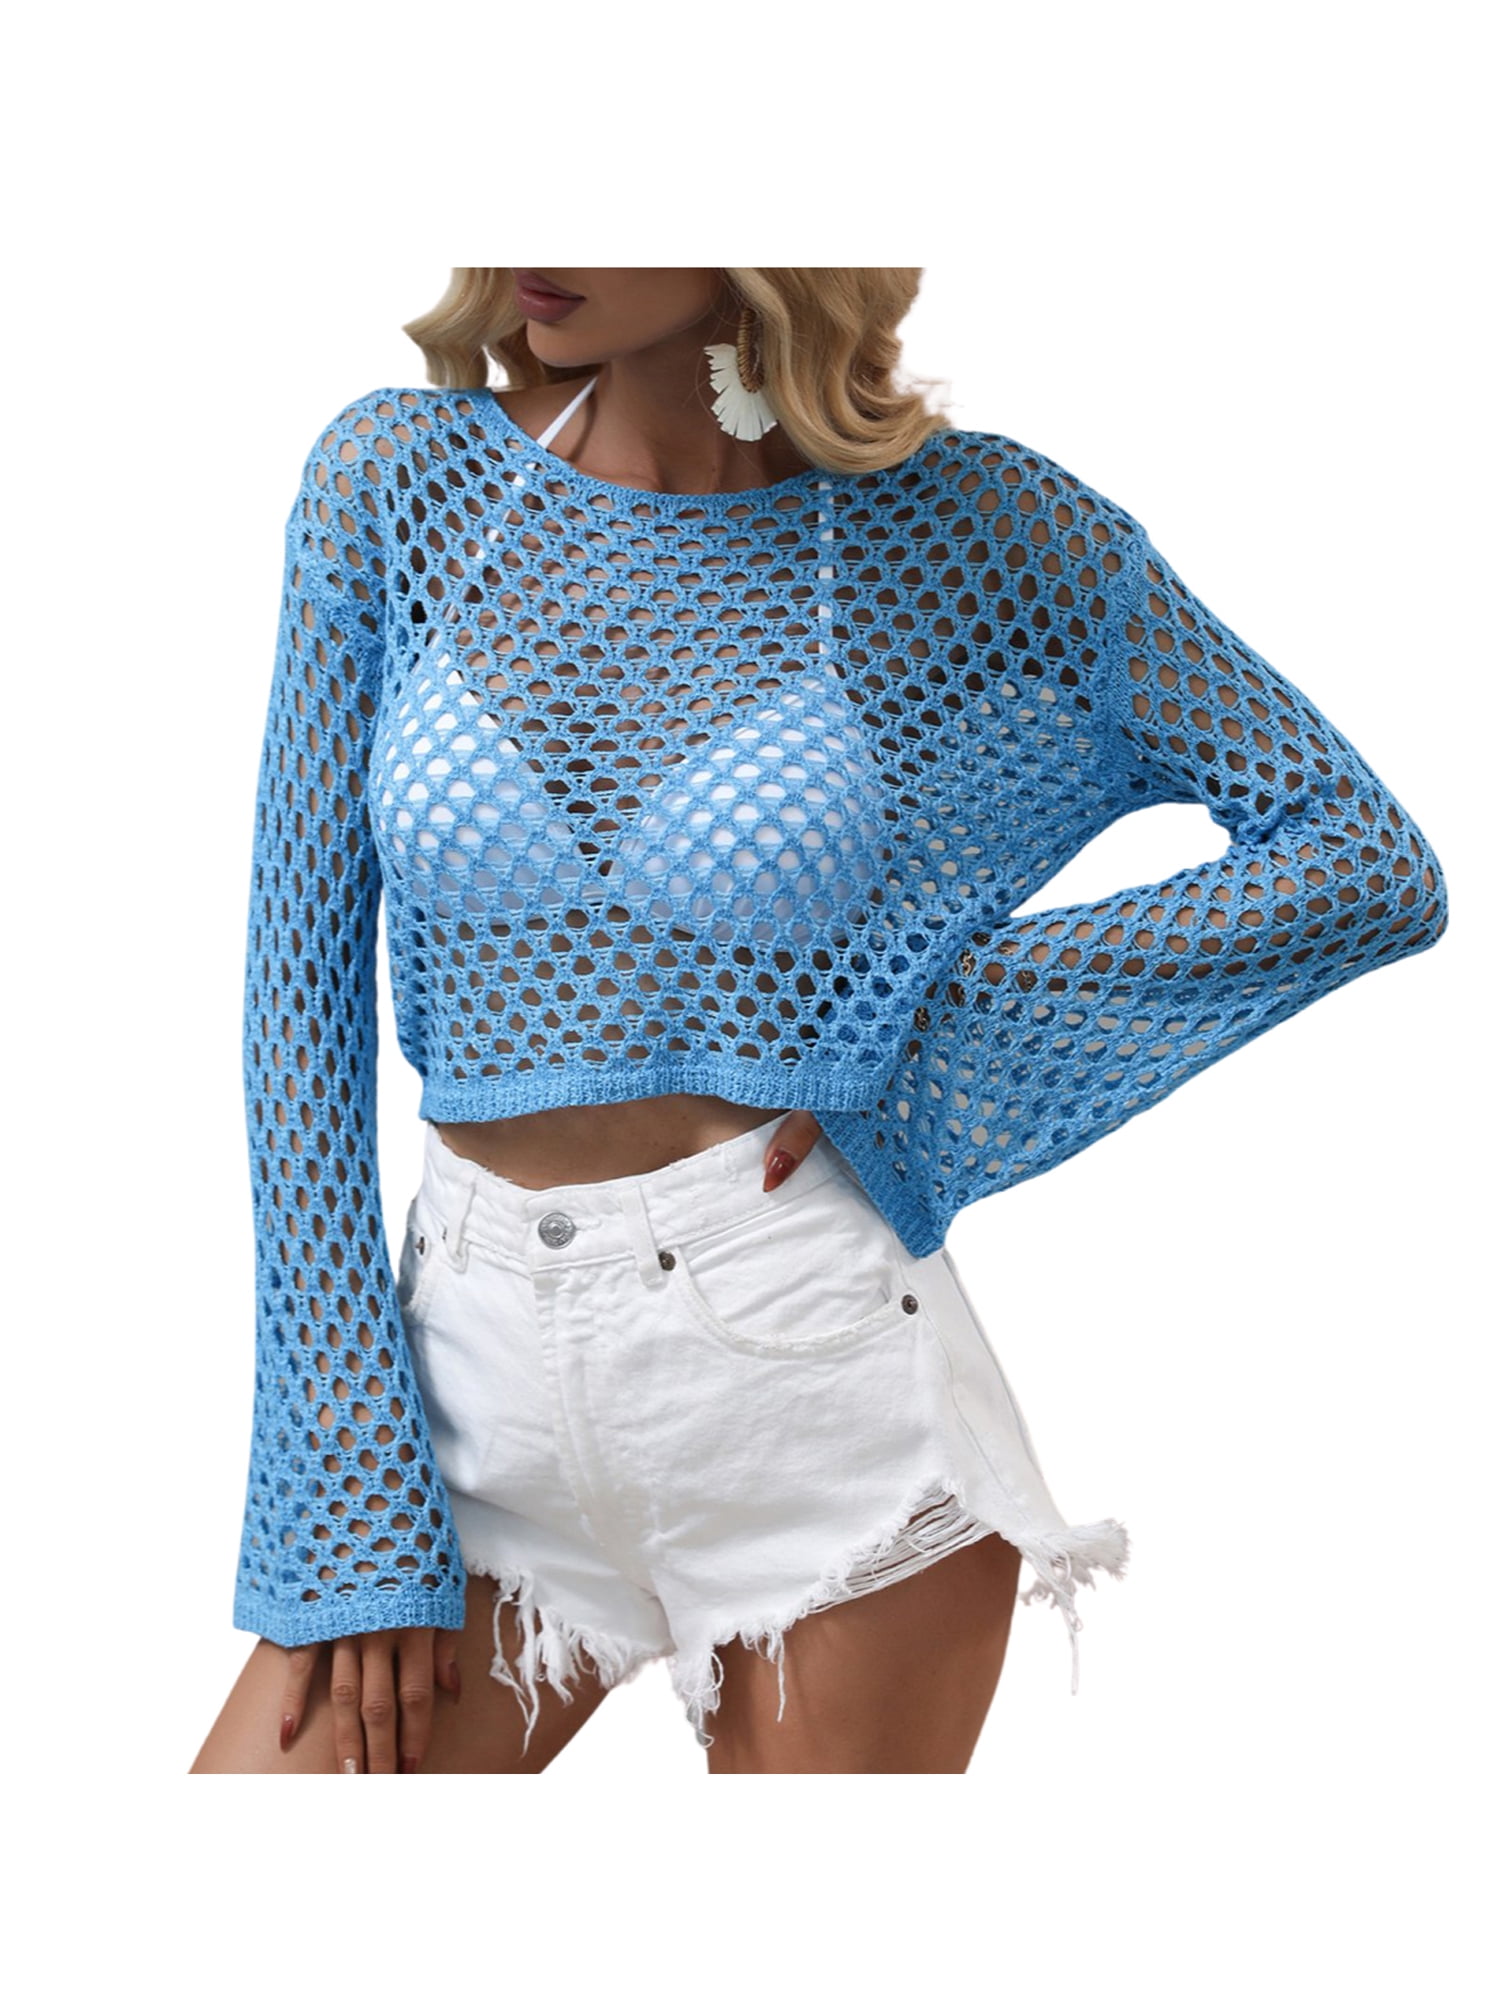 Youweixiong Women Sexy Hollow Out Long Sleeve Mesh Crop Top Round-Neck  Knitted See-Through Fish Net Pullover Cover Up T-Shirt